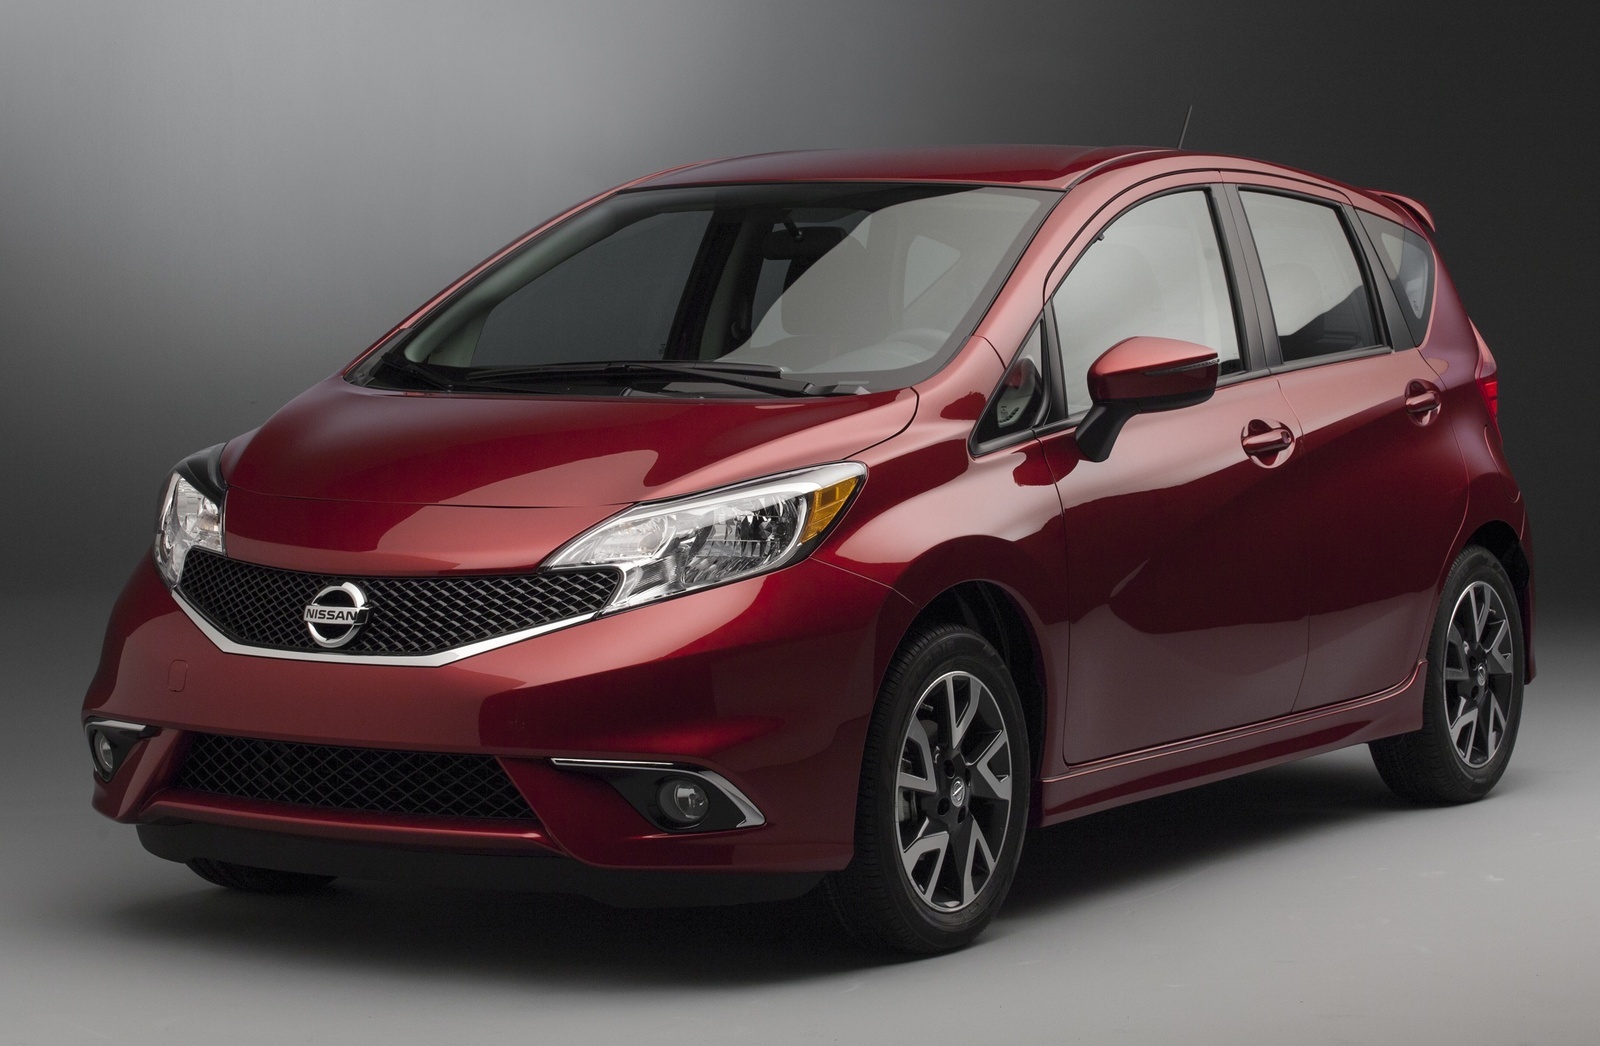 2015 Nissan Versa Note: Prices, Reviews & Pictures - CarGurus